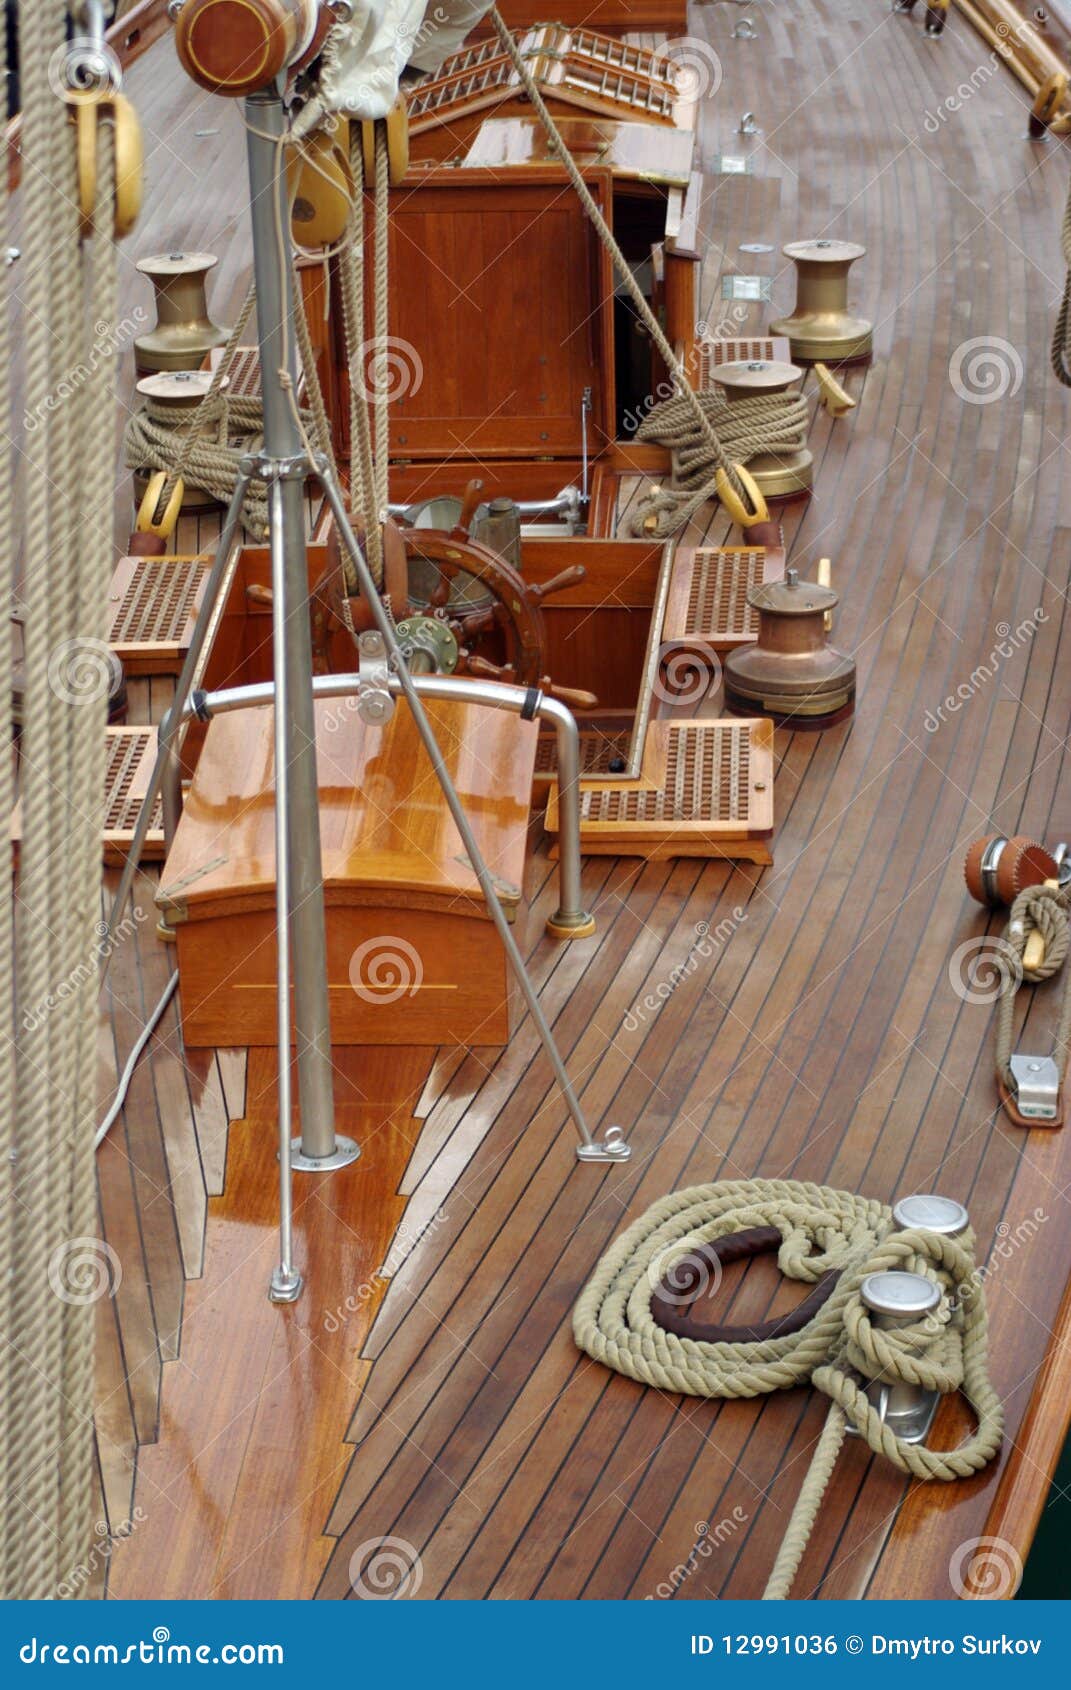 Wooden sailboat stock photo. Image of bond, helm, cable ...